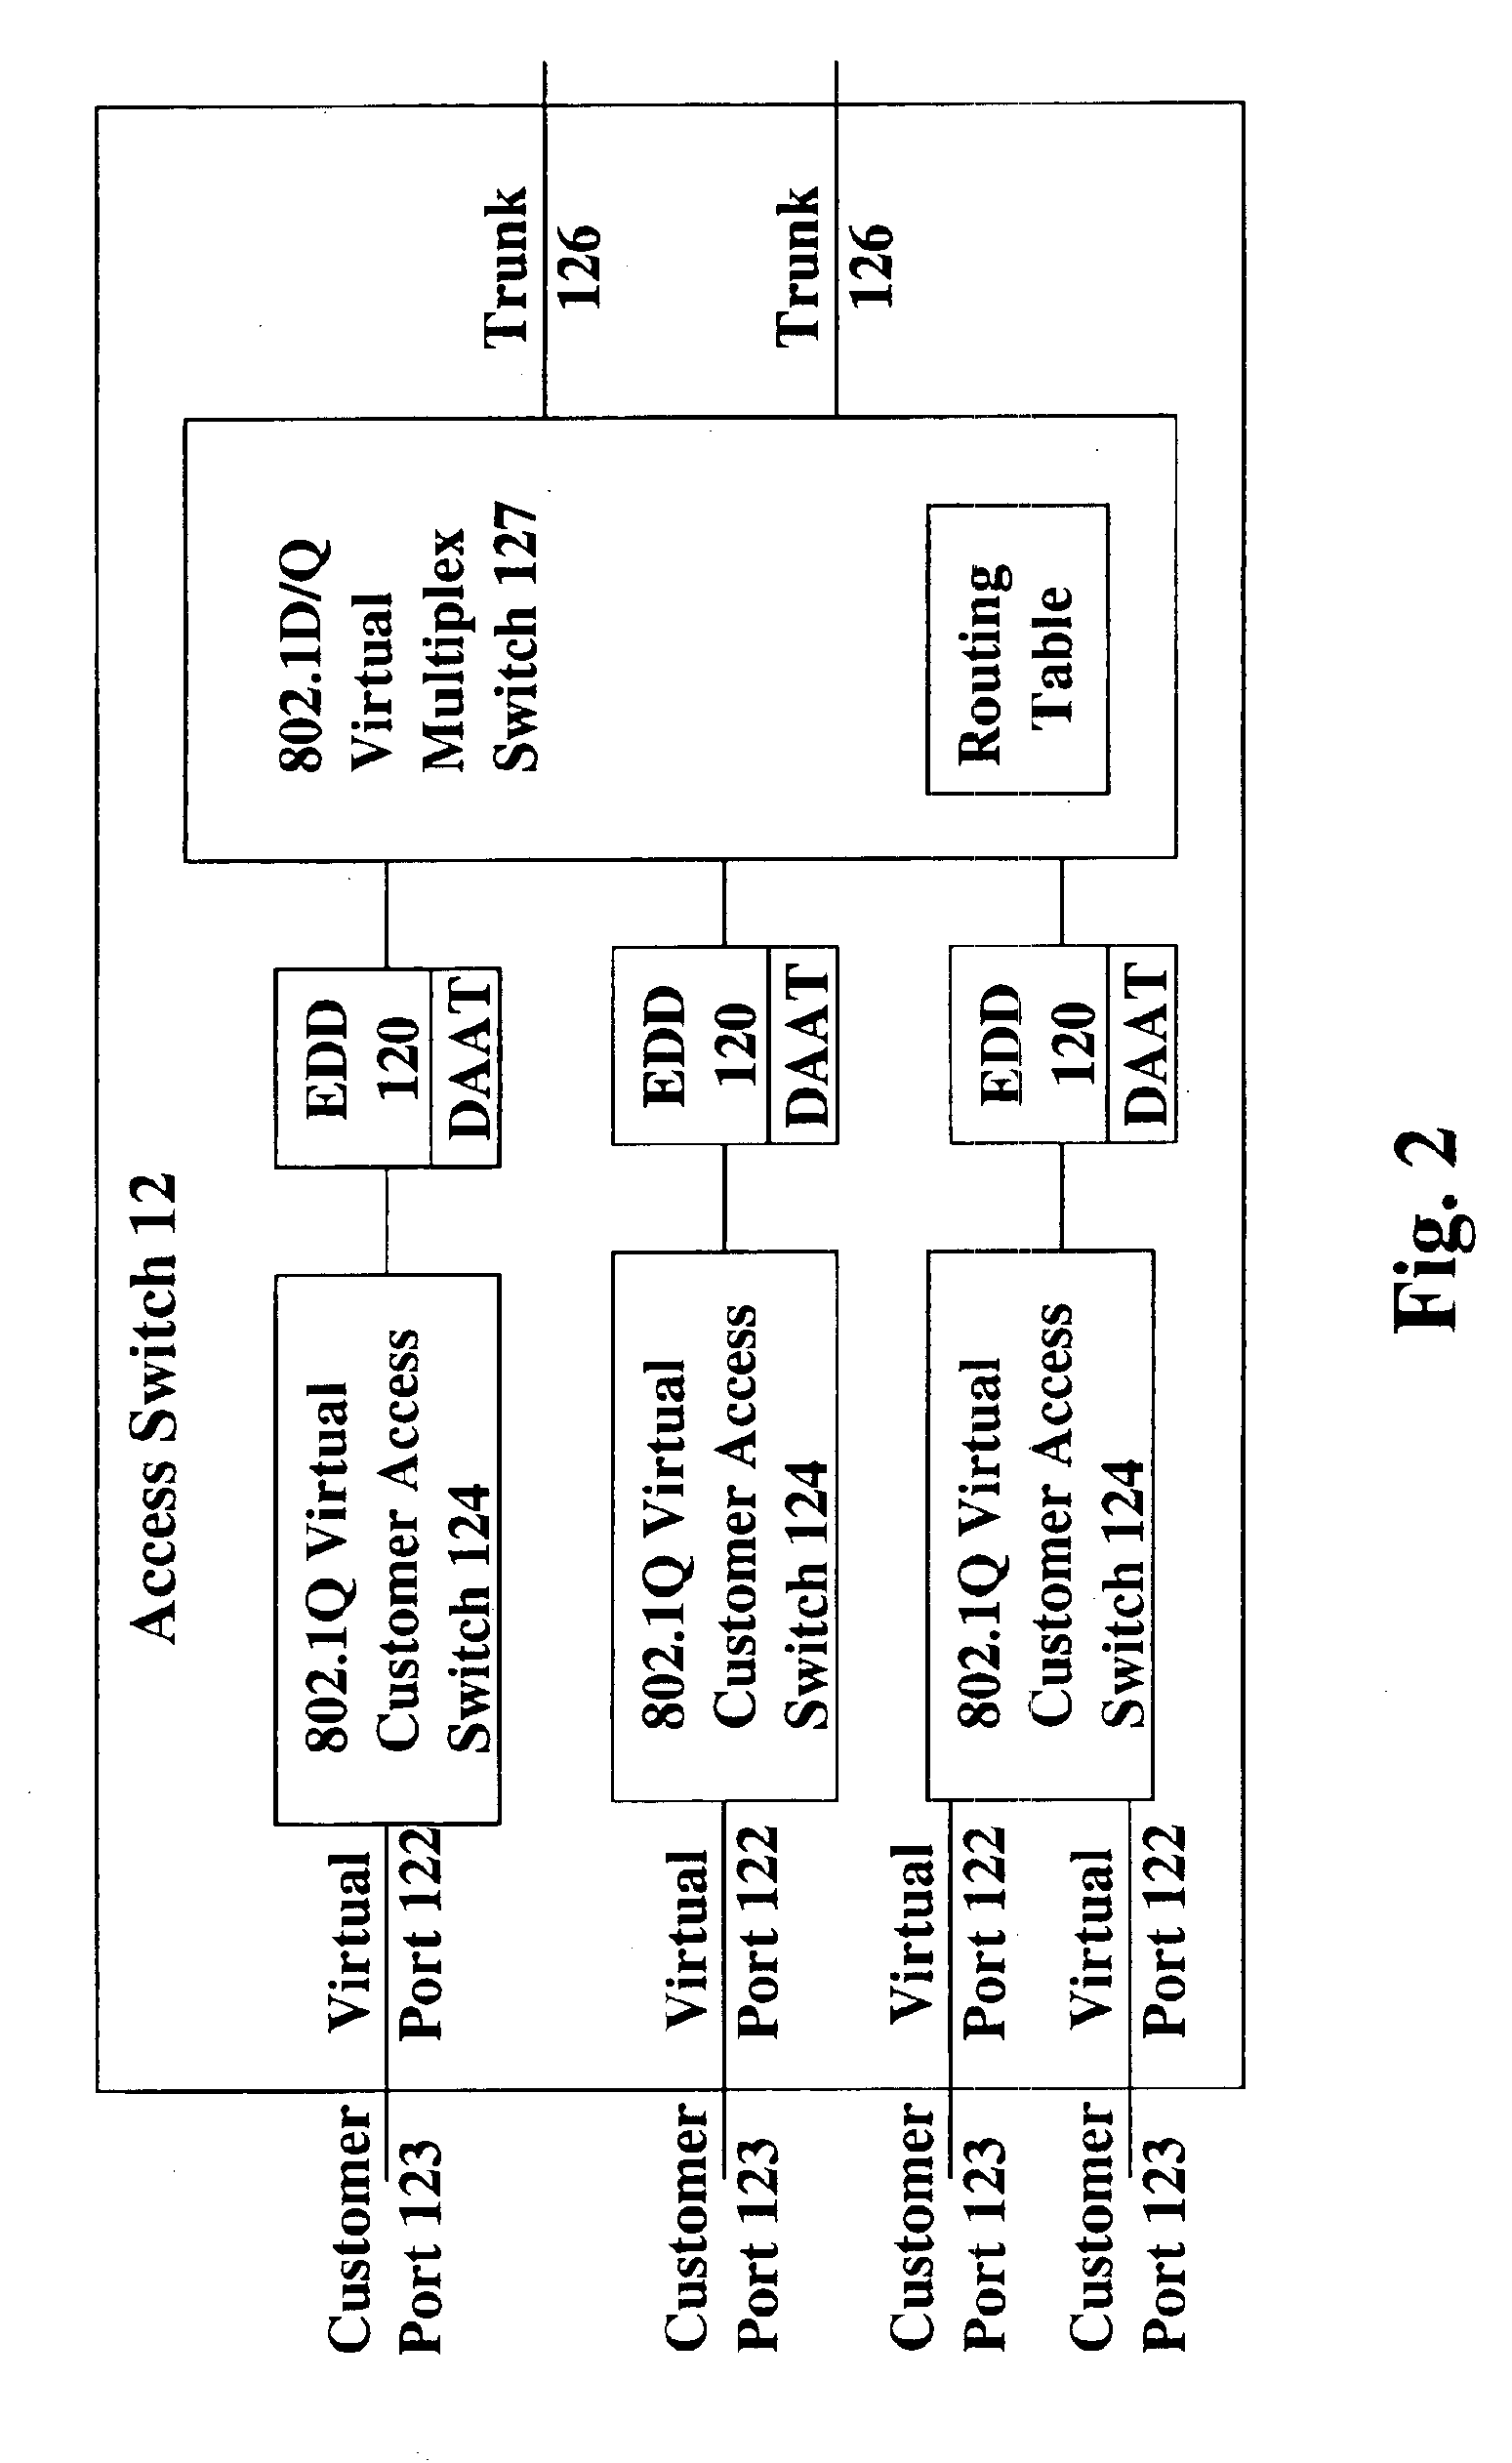 Virtual private networks and methods for their operation